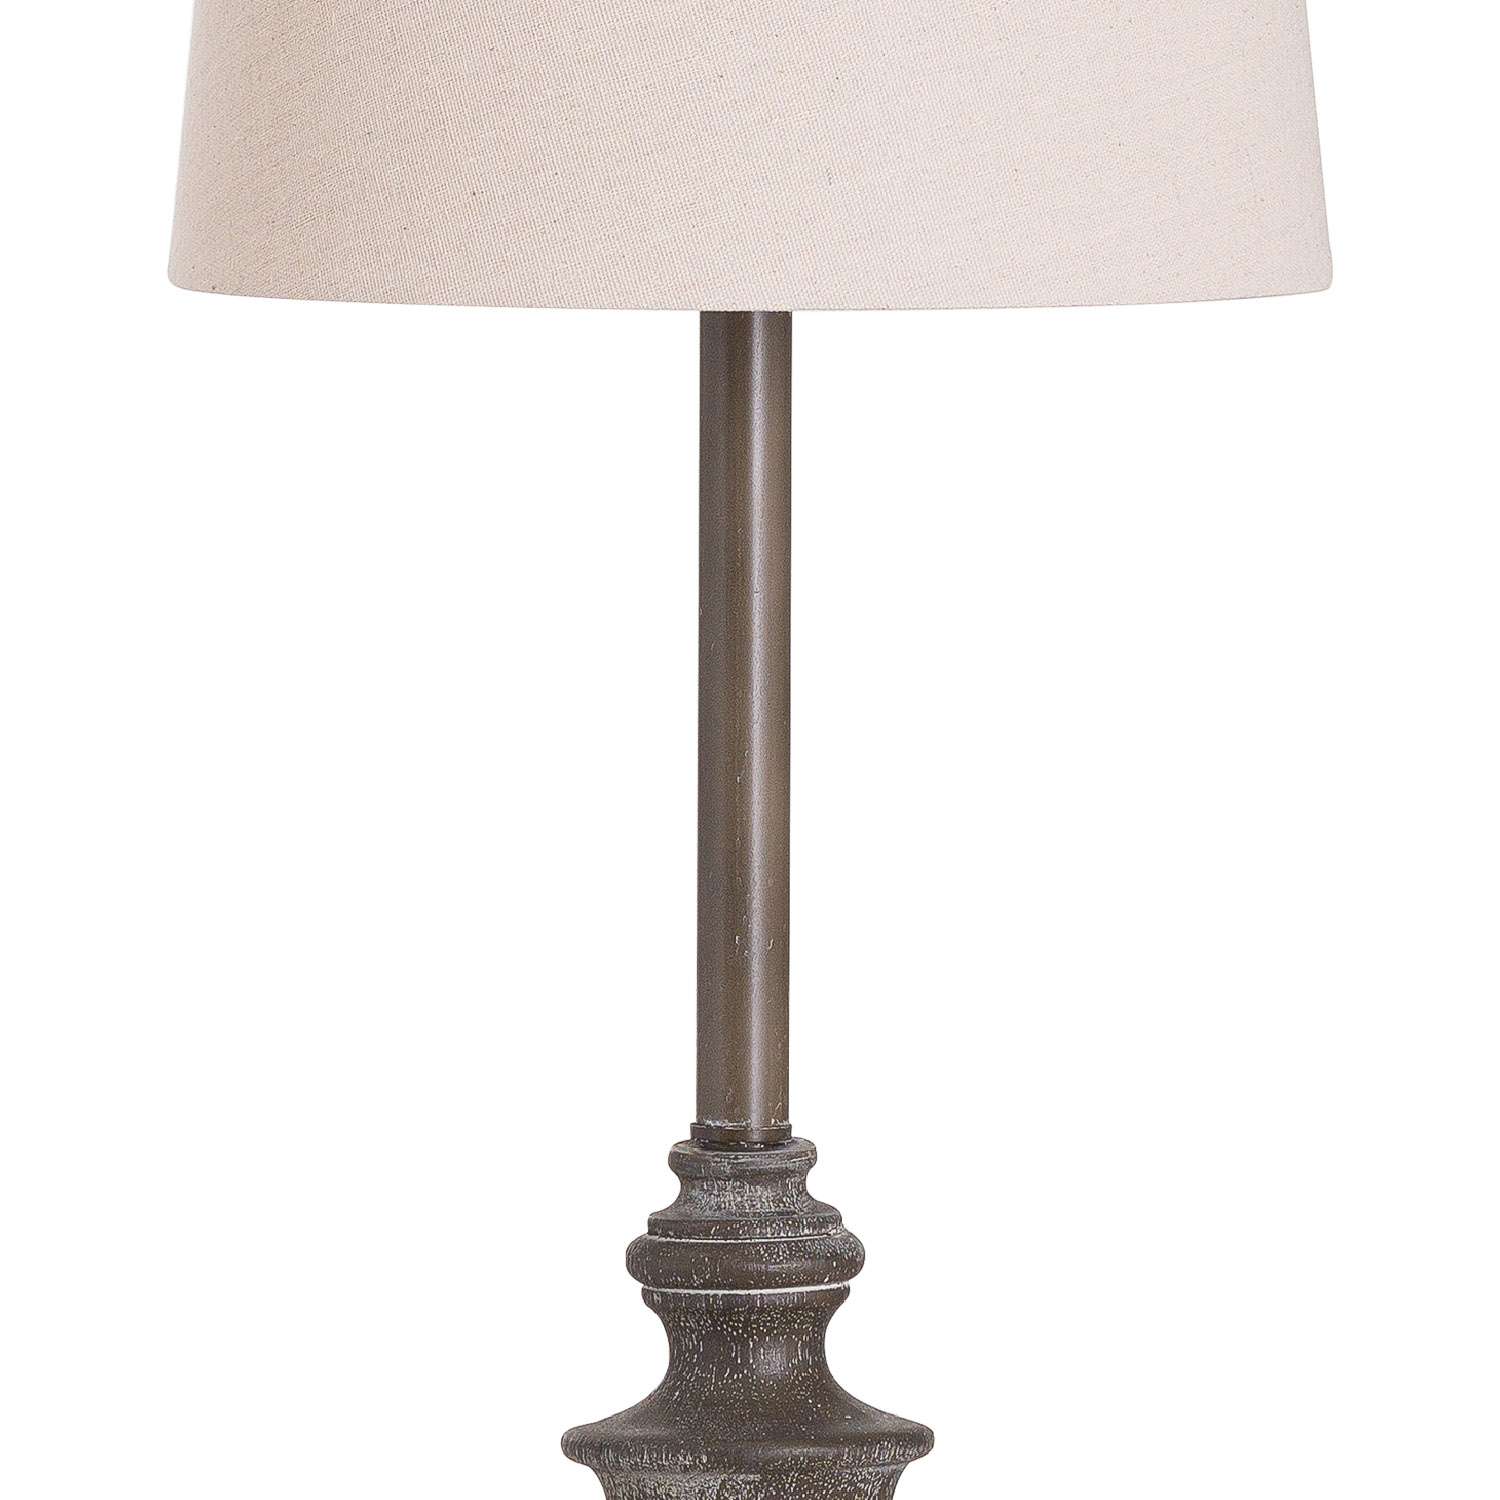 Calven Antiqued Table Lamp With Natural Shade - Image 2